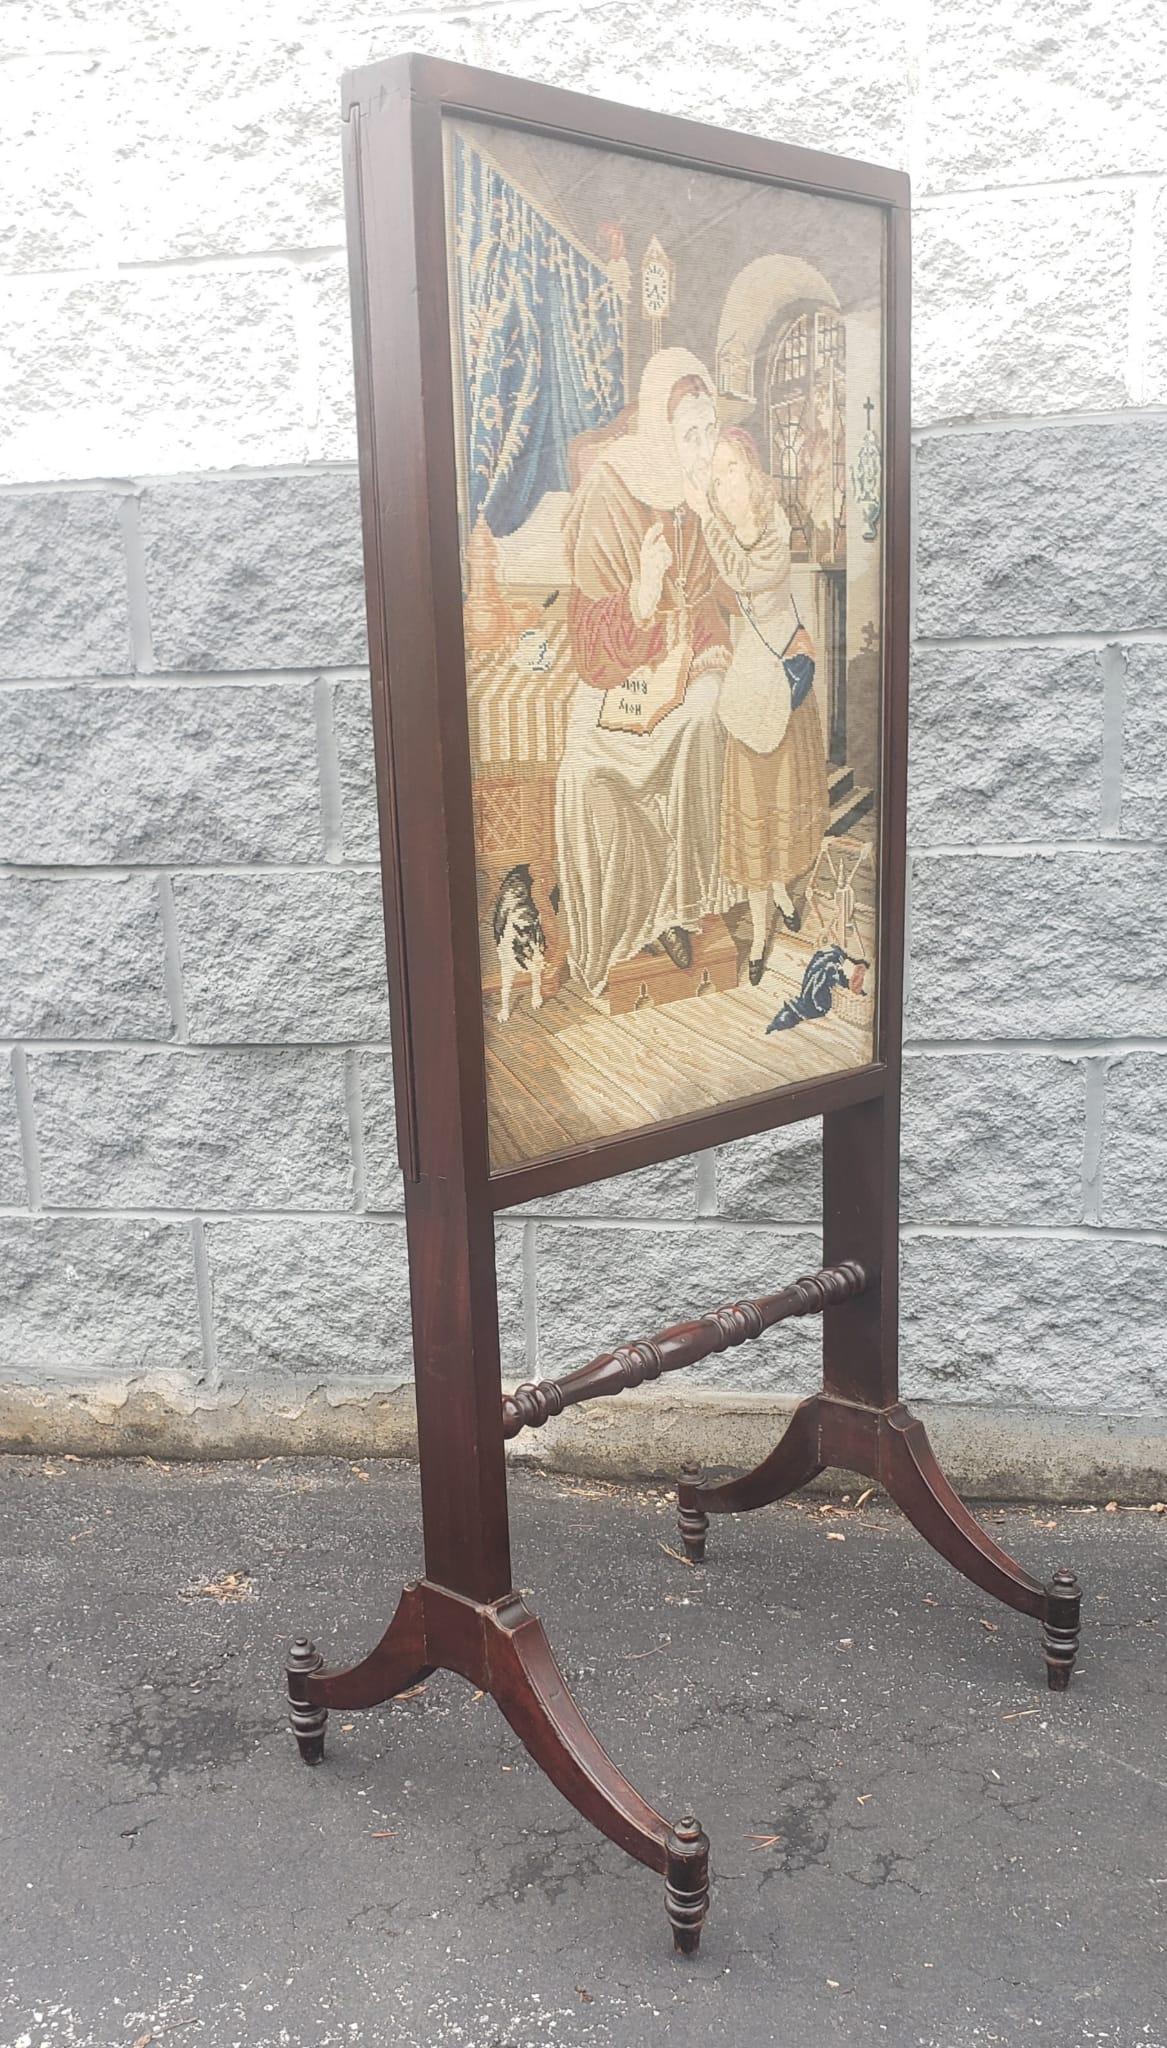 19th century continental mahogany and tapestry expandable trestle fire screen. The handmade tapestry depicts a lady sitting down ( possibly a Nun or Reverend Mother) with holy bible on her laps and embrassing a young girl standing by her side. The